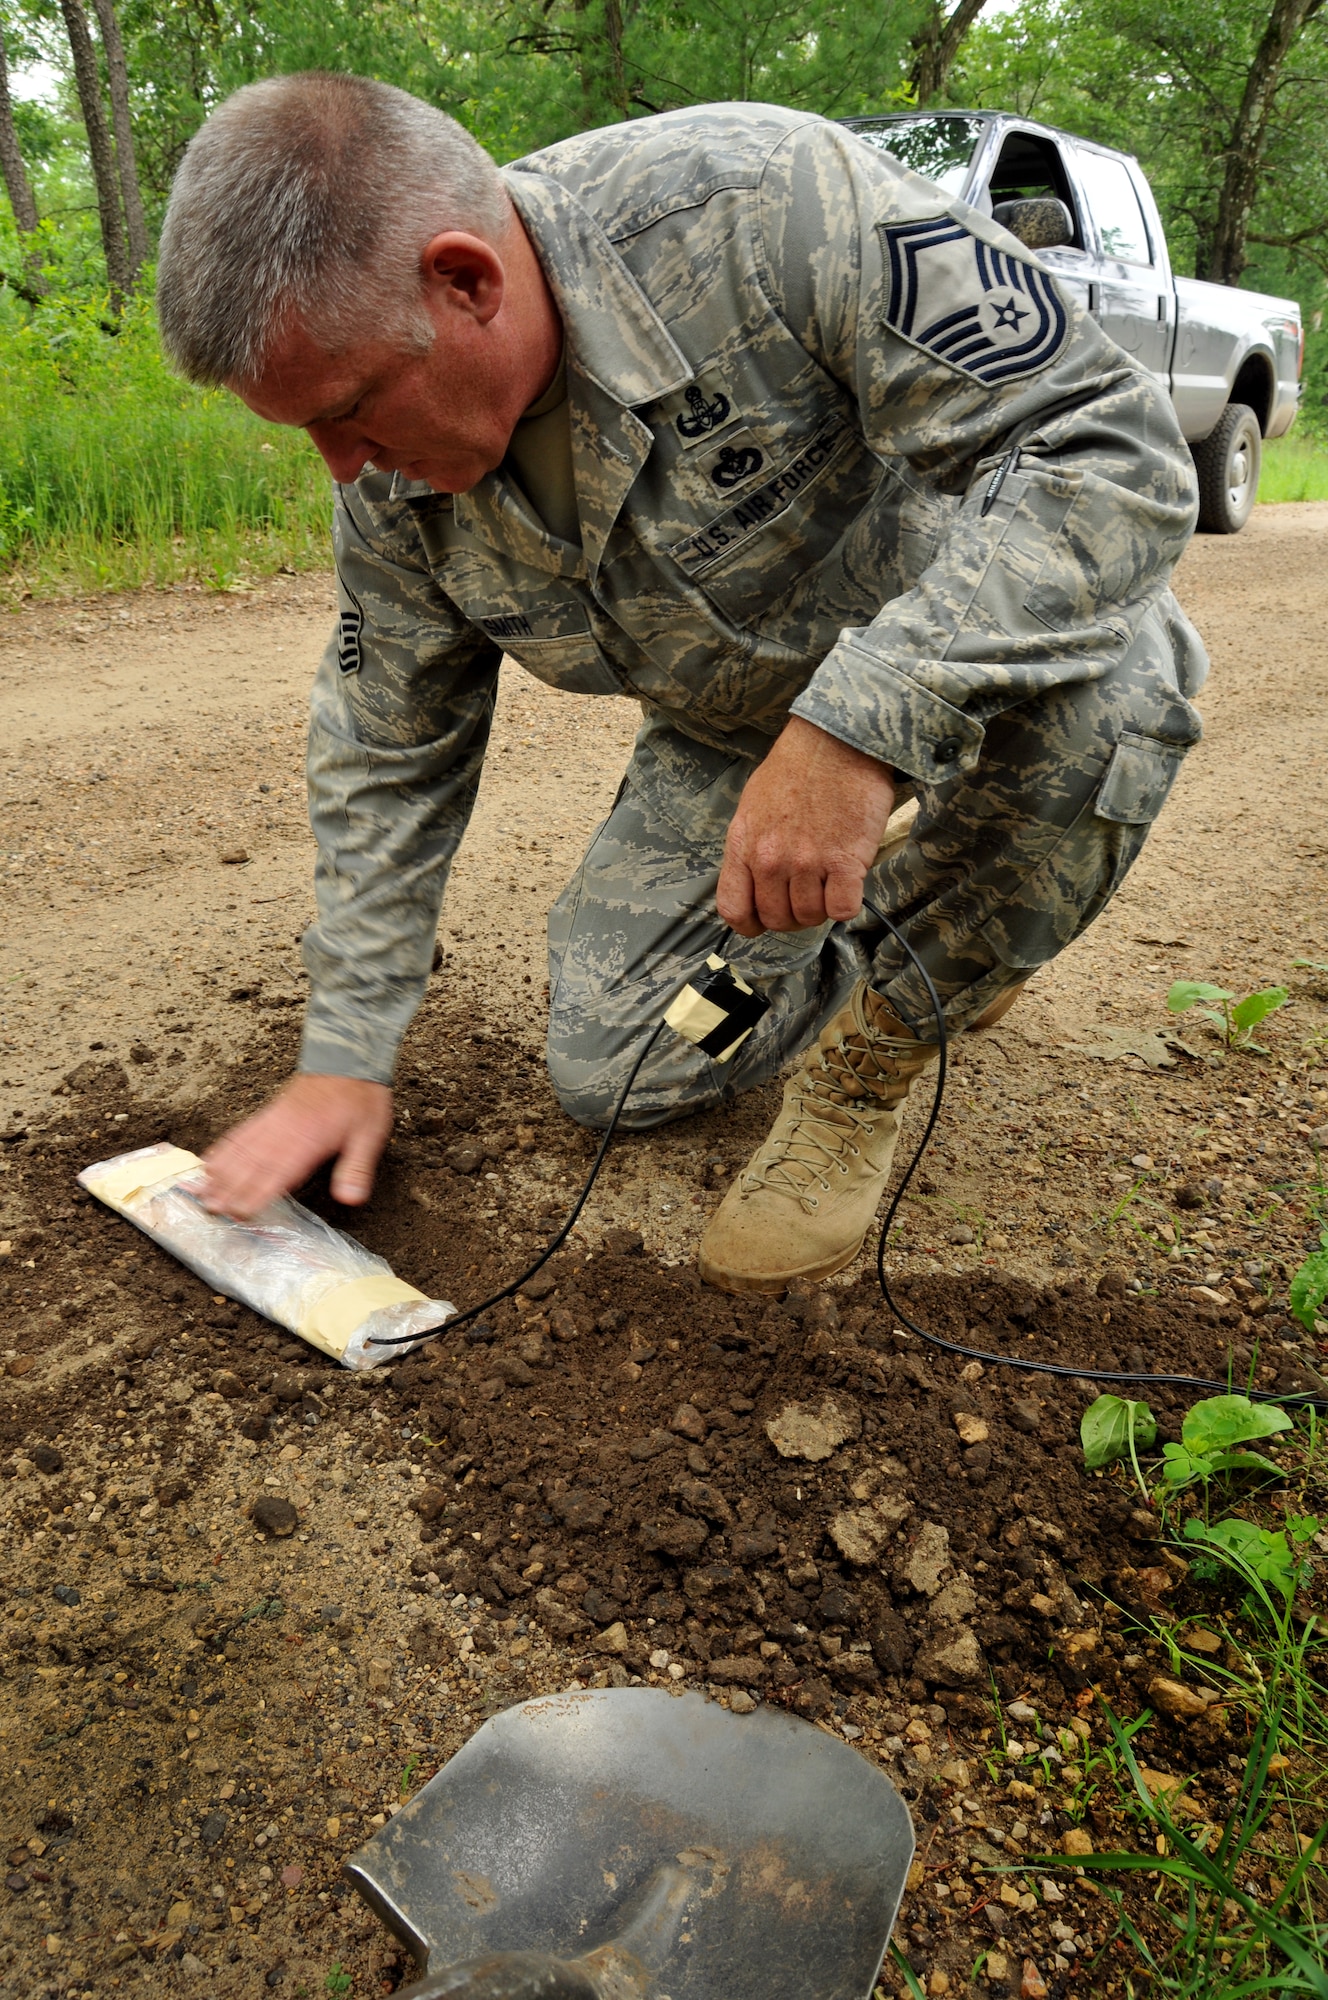 Senior Master Sgt. Ed Smith, 115th Fighter Wing Explosive Ordinance Disposal Flight, lays a simulated pressure plate detonation device in the road during convoy training at Volk Field CRTC, Wis., June 12, 2010.  Sgt. Smith assisted in leading the 115FW Civil Engineering Squadron during annual training.(U.S. Air Force photo by Staff Sgt. Christen Bloomfield)